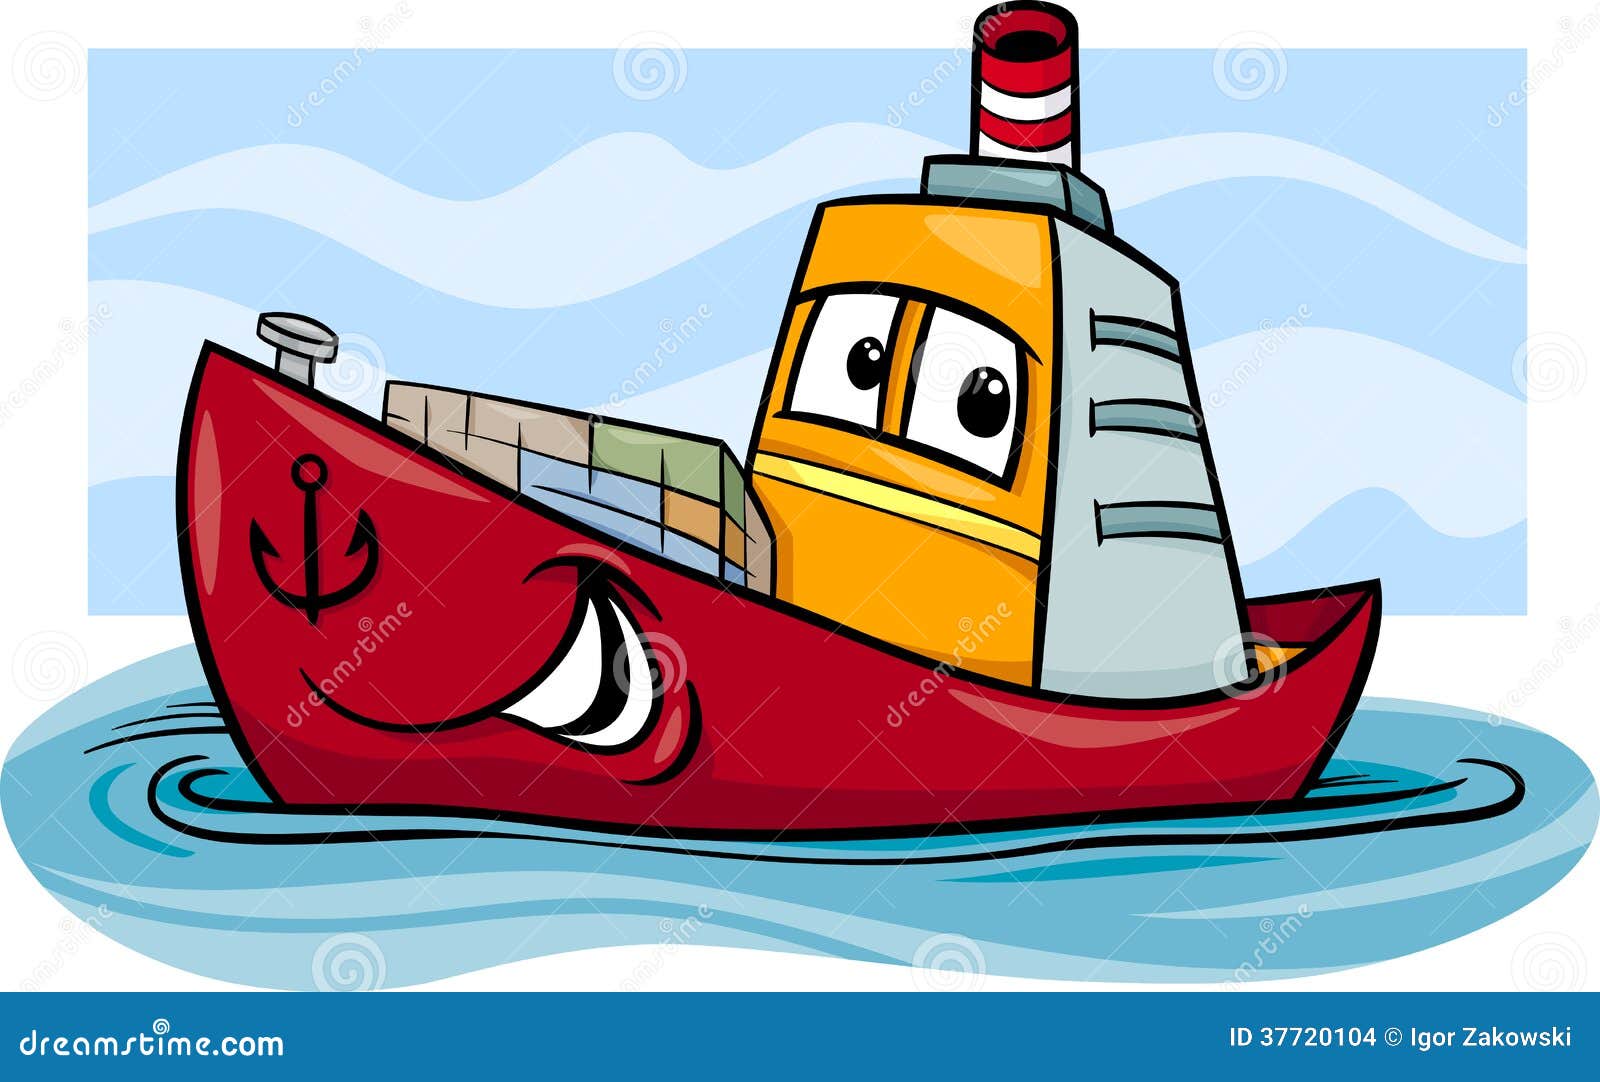 Container Ship Cartoon Illustration Stock Images - Image 